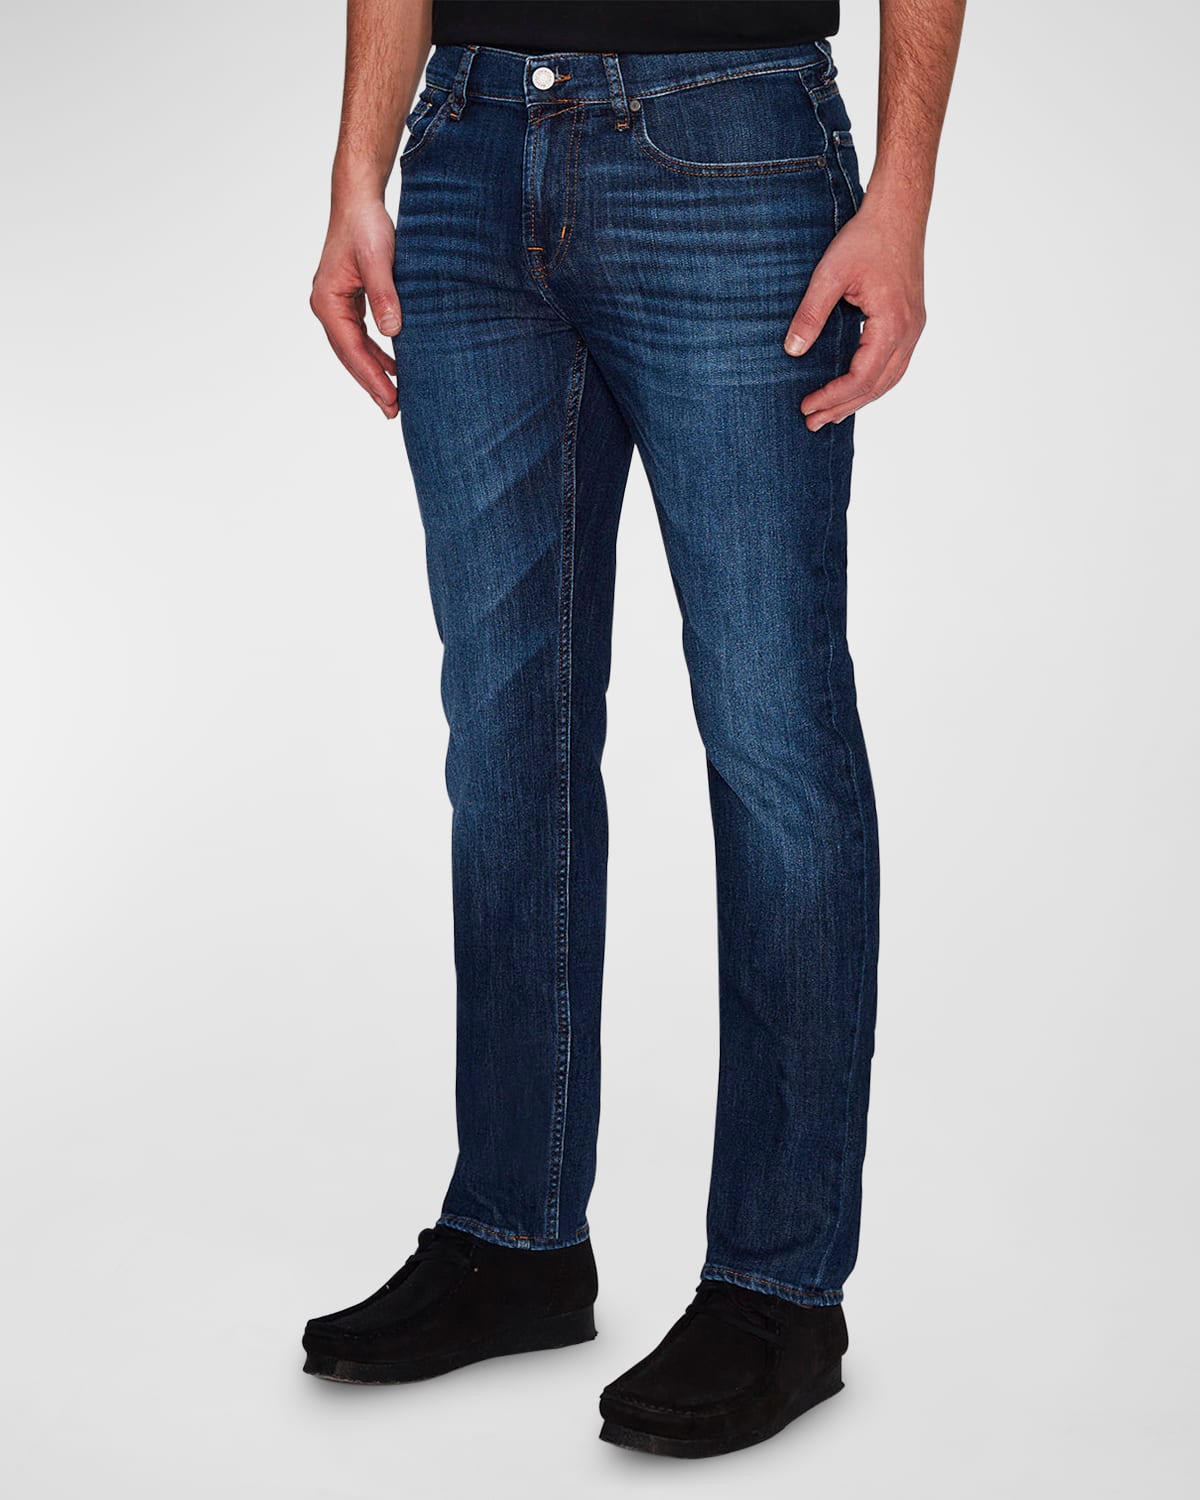 7 For All Mankind Men's Slimmy Airweft Jeans In Malibu